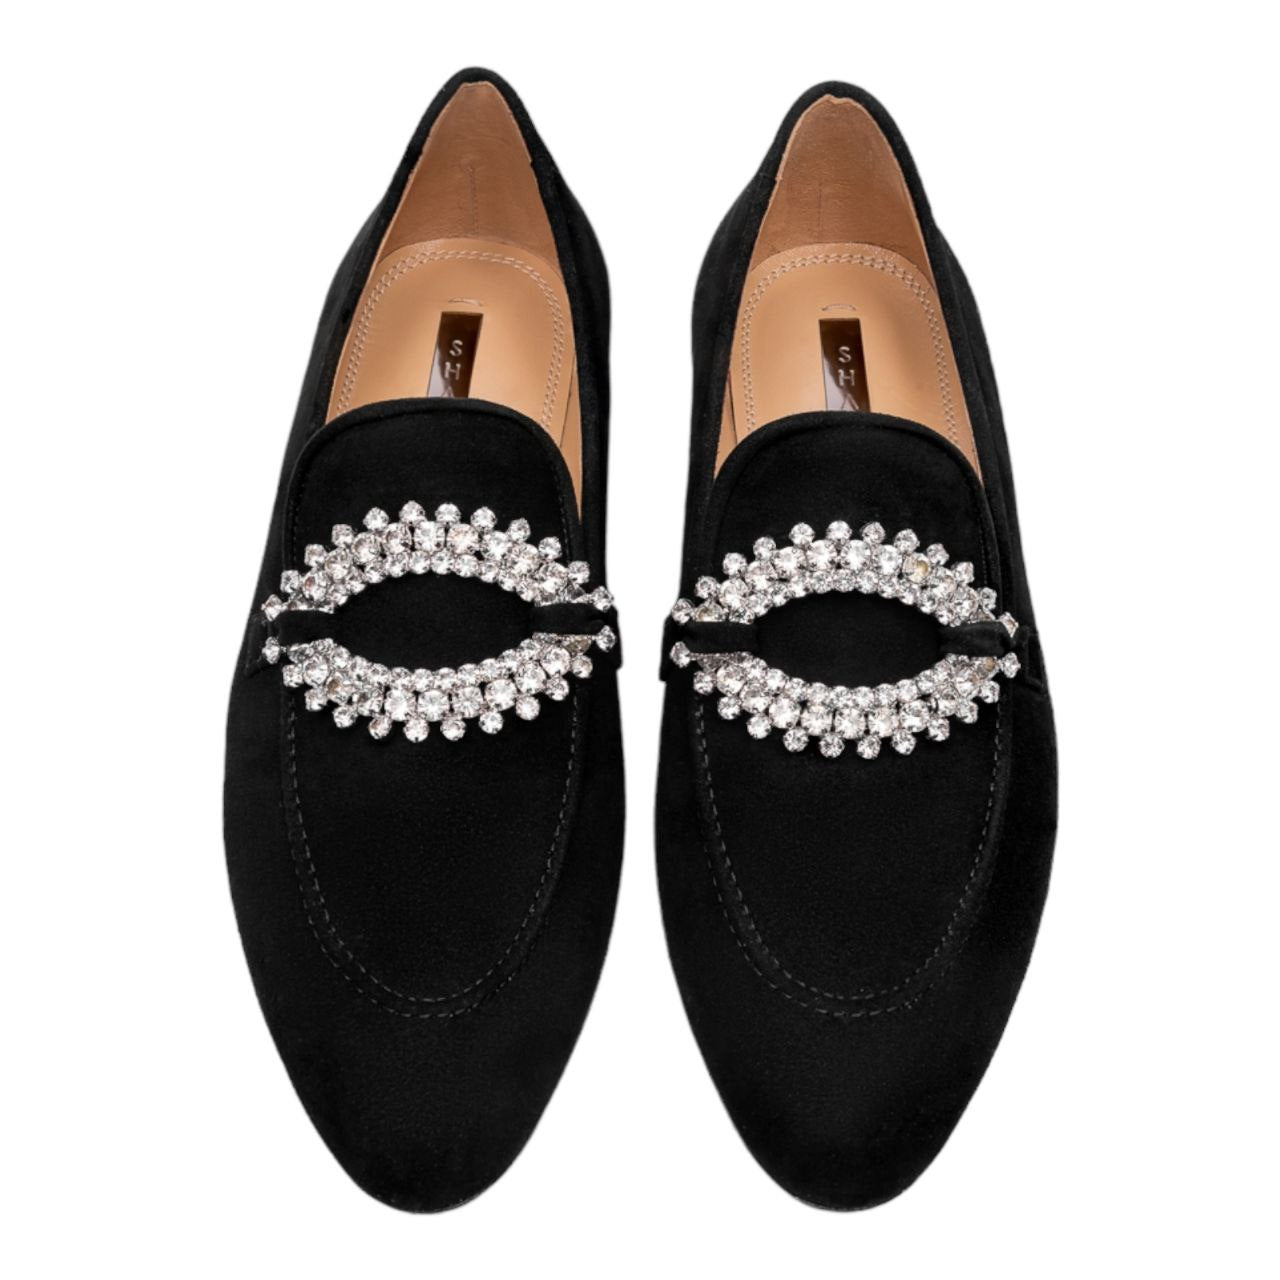 SHAMA - Kate Black suede Loafers , buy at DOORS NYC